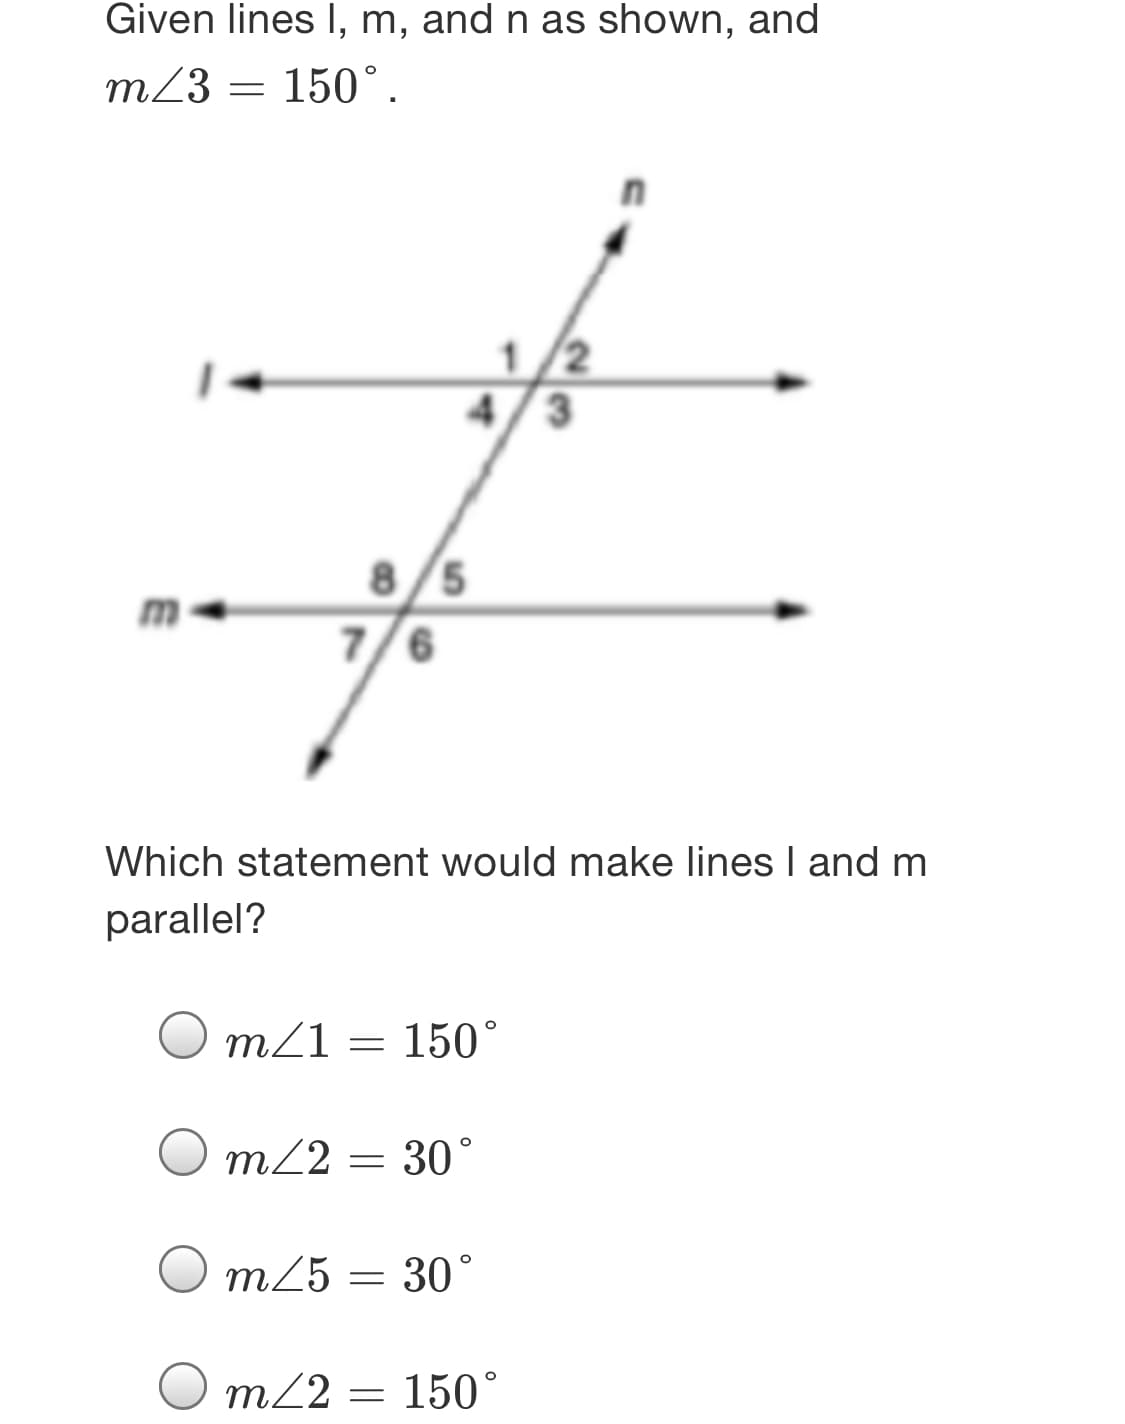 Given lines I, m, and n as shown, and
m/3 = 150°.
1/2
4/3
8/5
7/6
9,
Which statement would make lines I and m
parallel?
O mz1 = 150°
m22 = 30°
m25
30°
O m/2 = 150°
